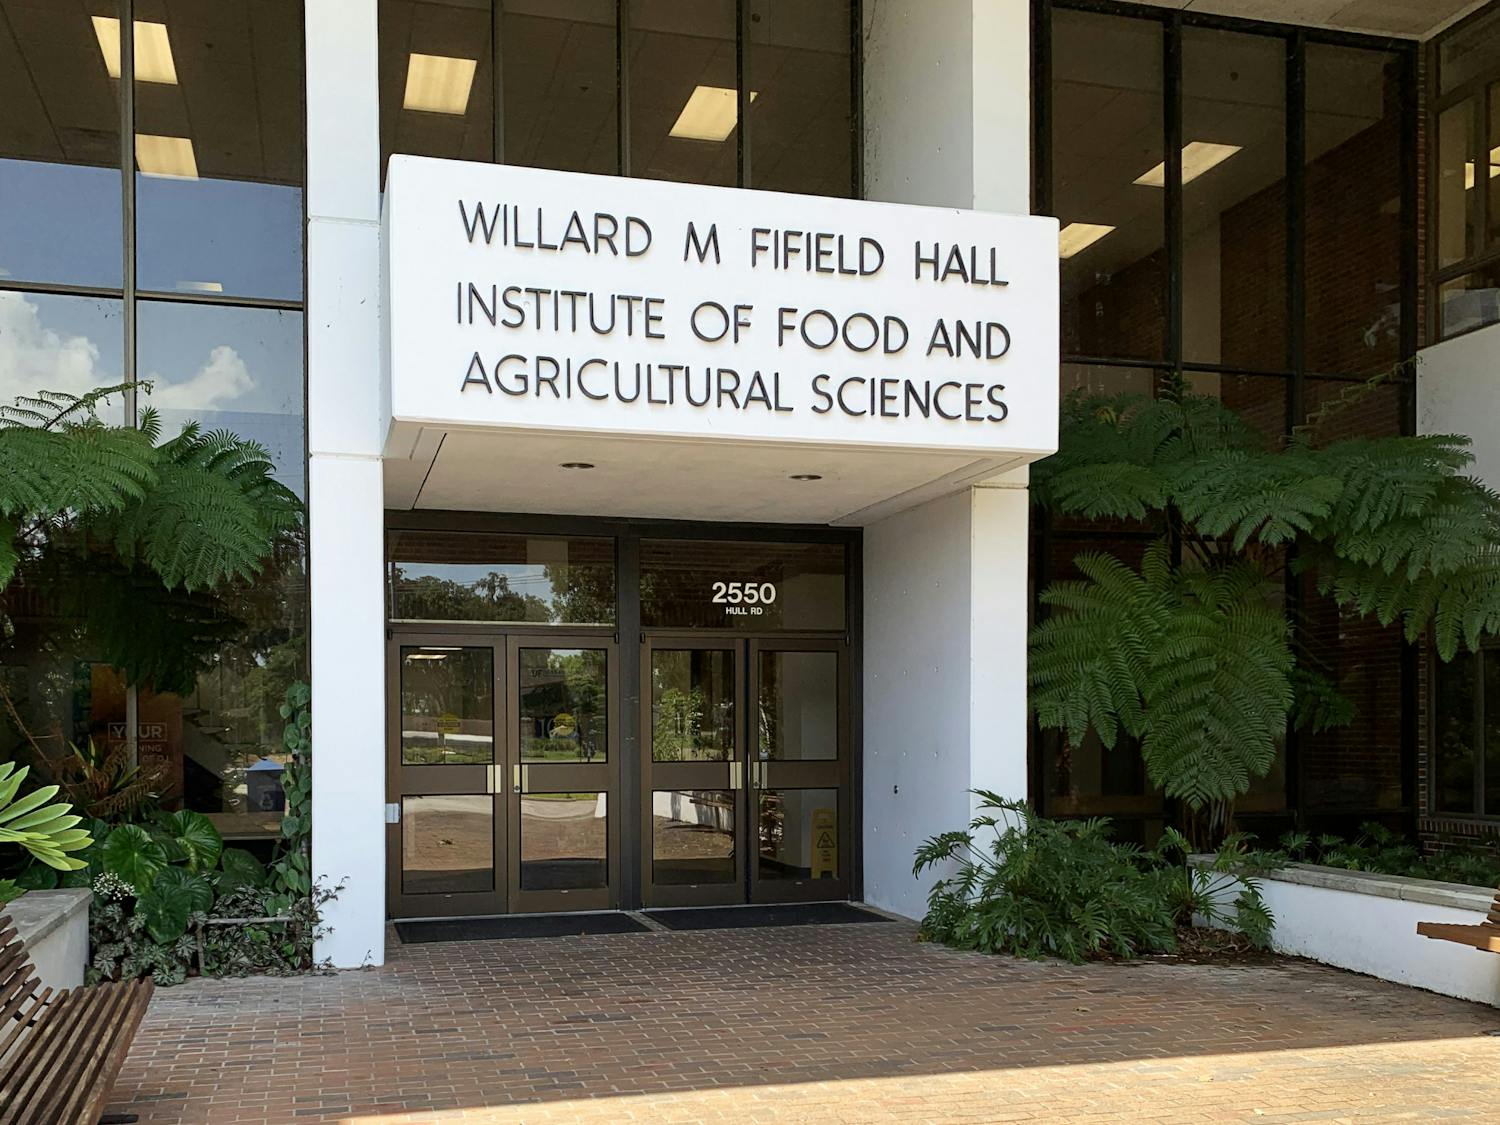 The Willard M. Fifield Hall Institute of Food and Agricultural Sciences, or IFAS, building on Tuesday, July 13, 2021. A Space Plants Lab, where plant molecular biologists Robert Ferl and Anna-Lisa Paul study plant growth in space environments, is located there.